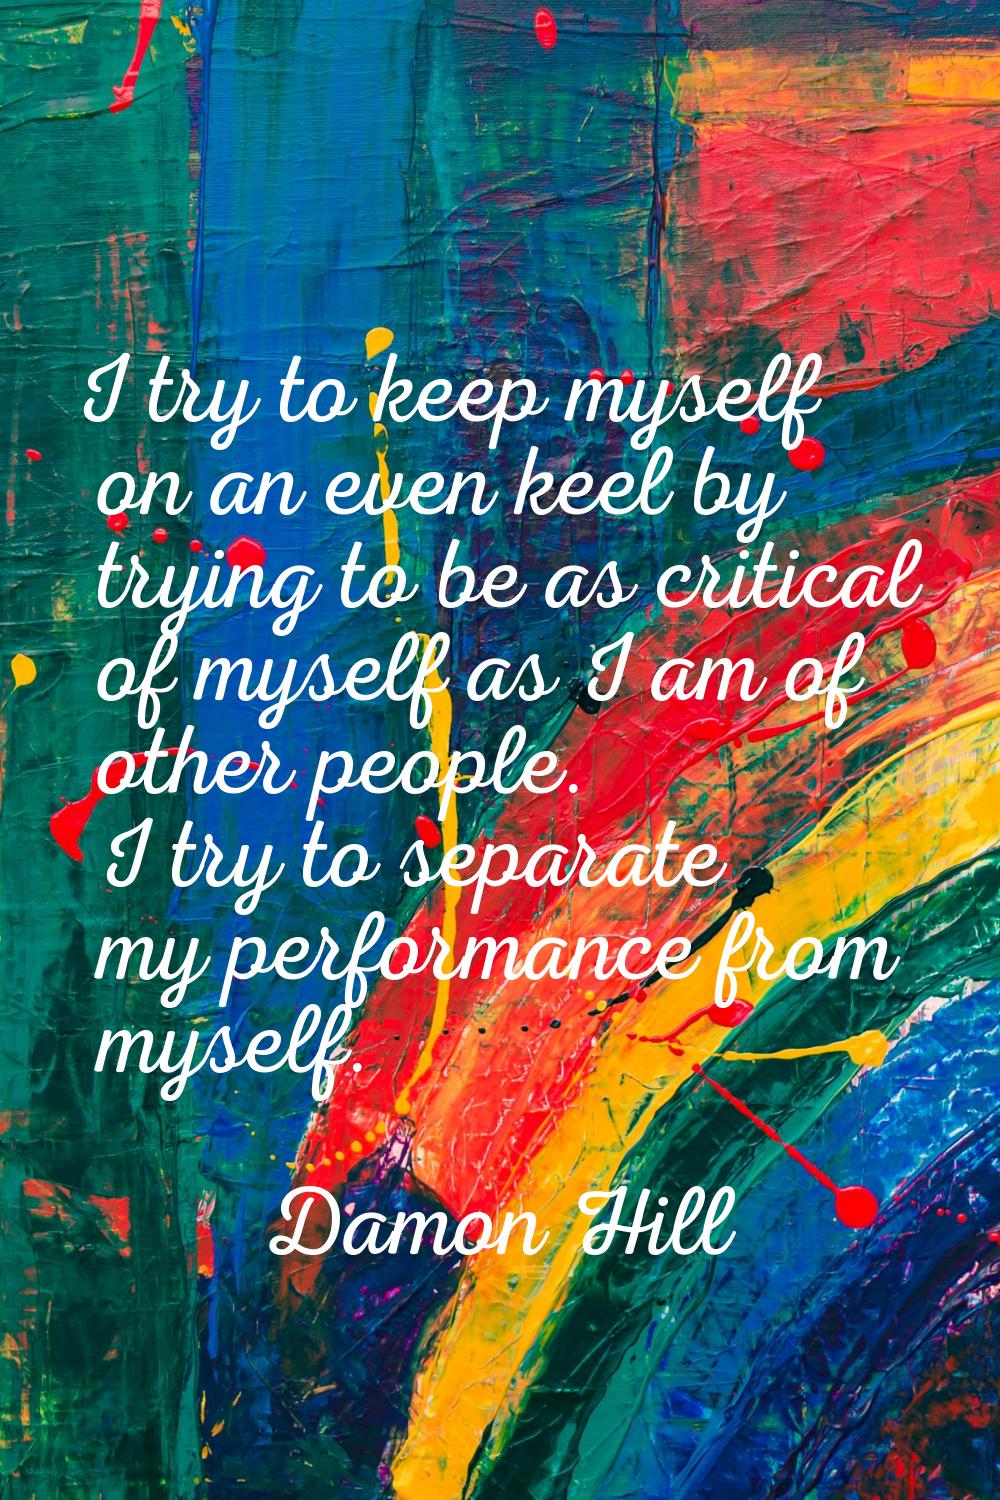 I try to keep myself on an even keel by trying to be as critical of myself as I am of other people.